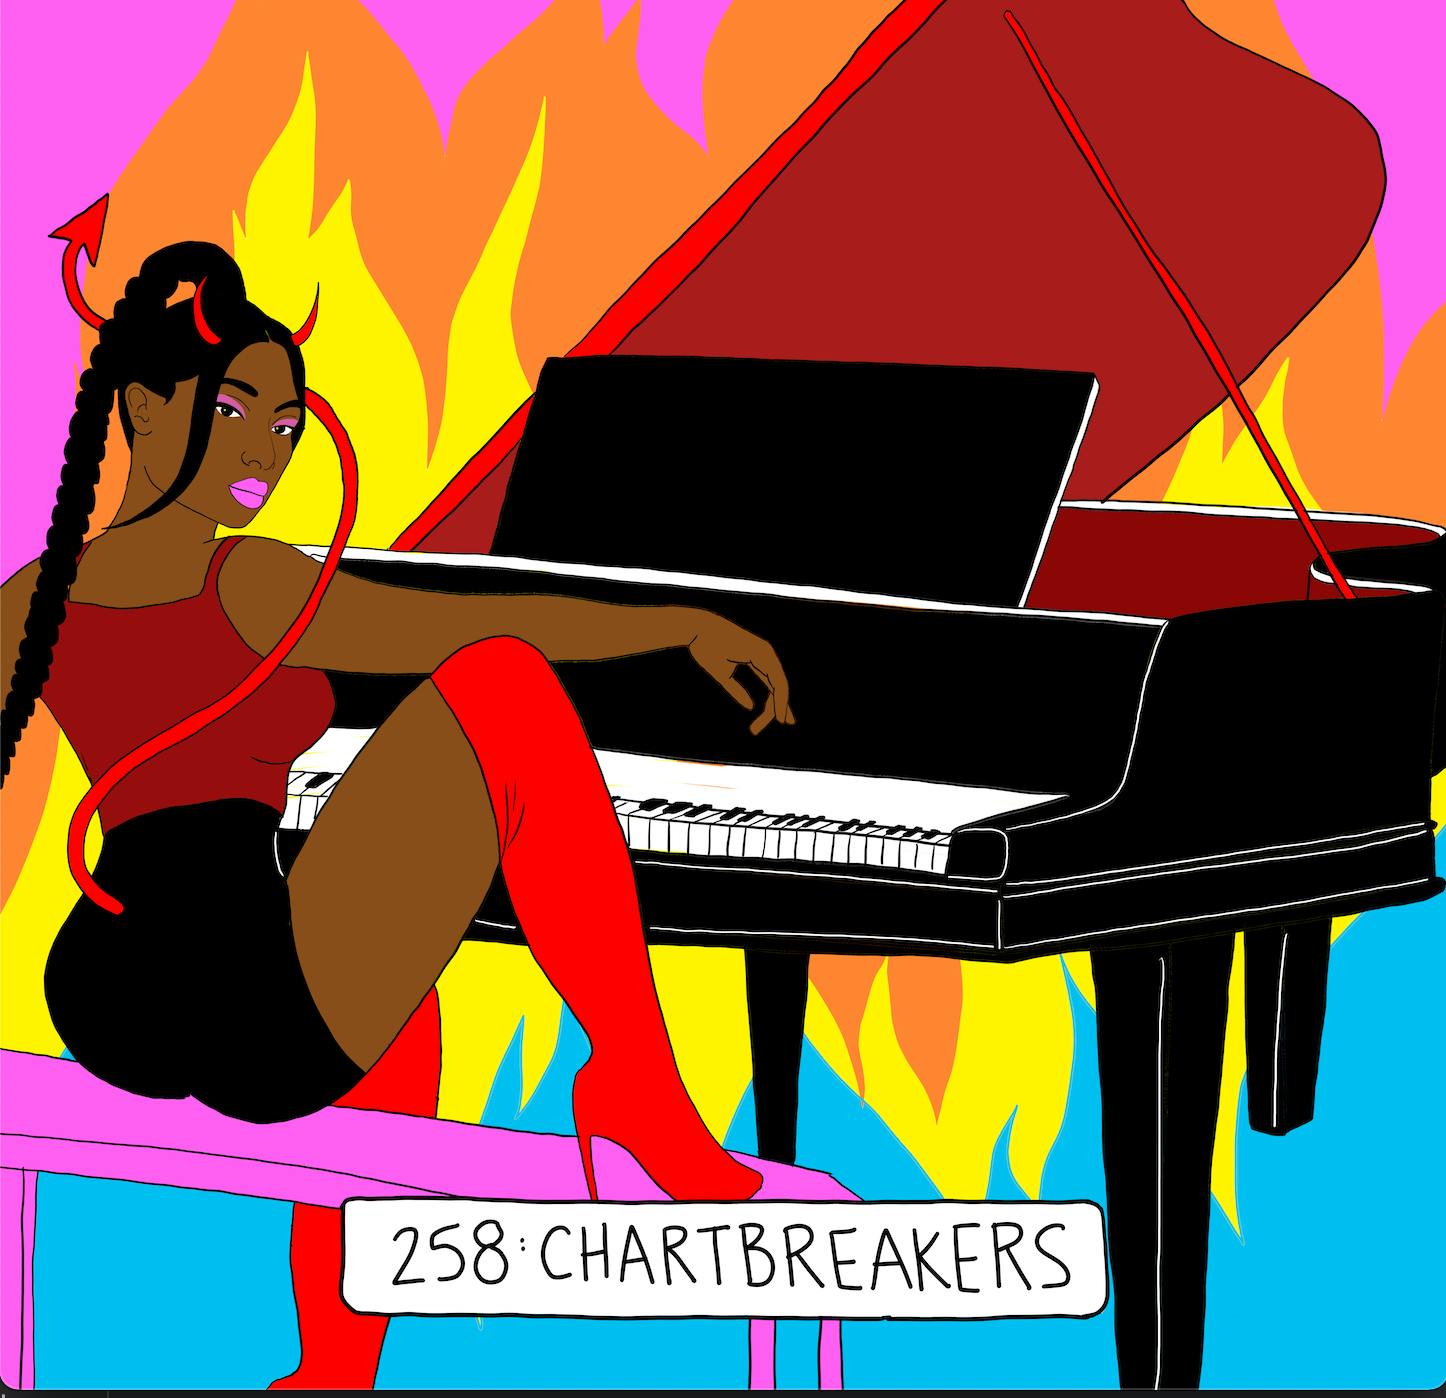 Chartbreakers (ft. Megan Thee Stallion and the Red Hot Chili Peppers)